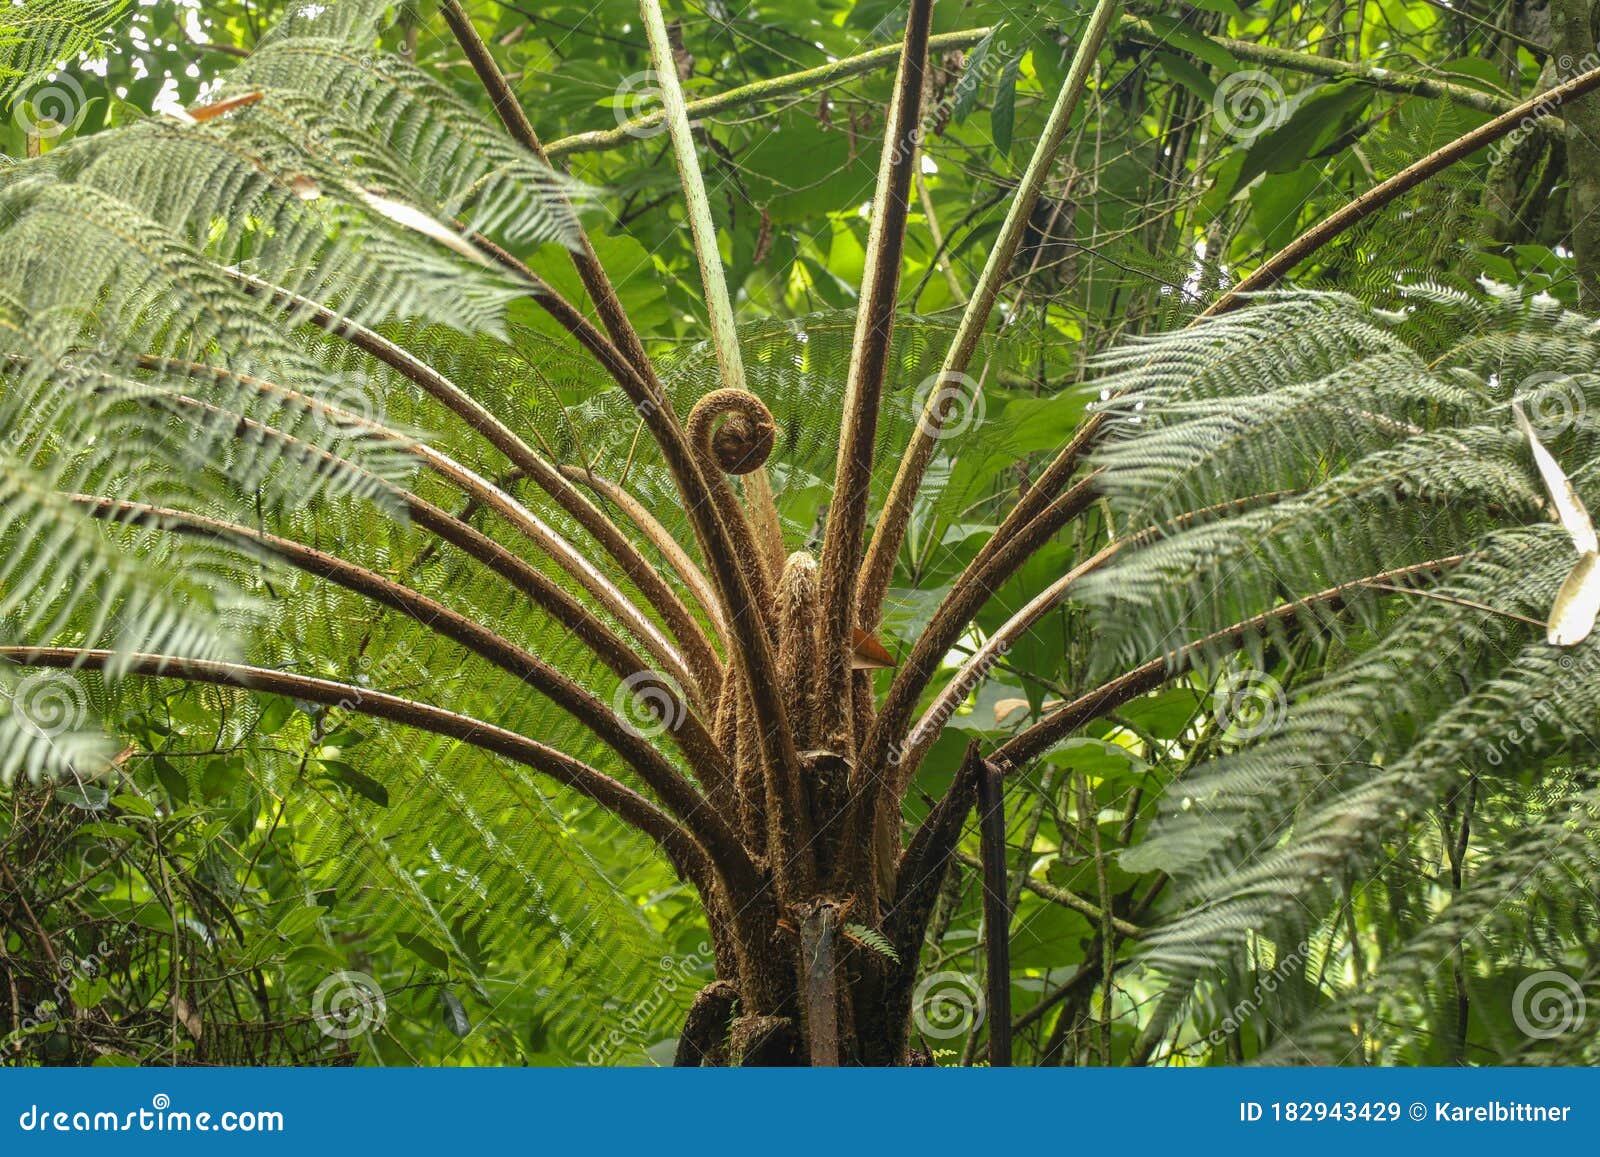 crown of tropical tree cyathea arborea. close up of branches of